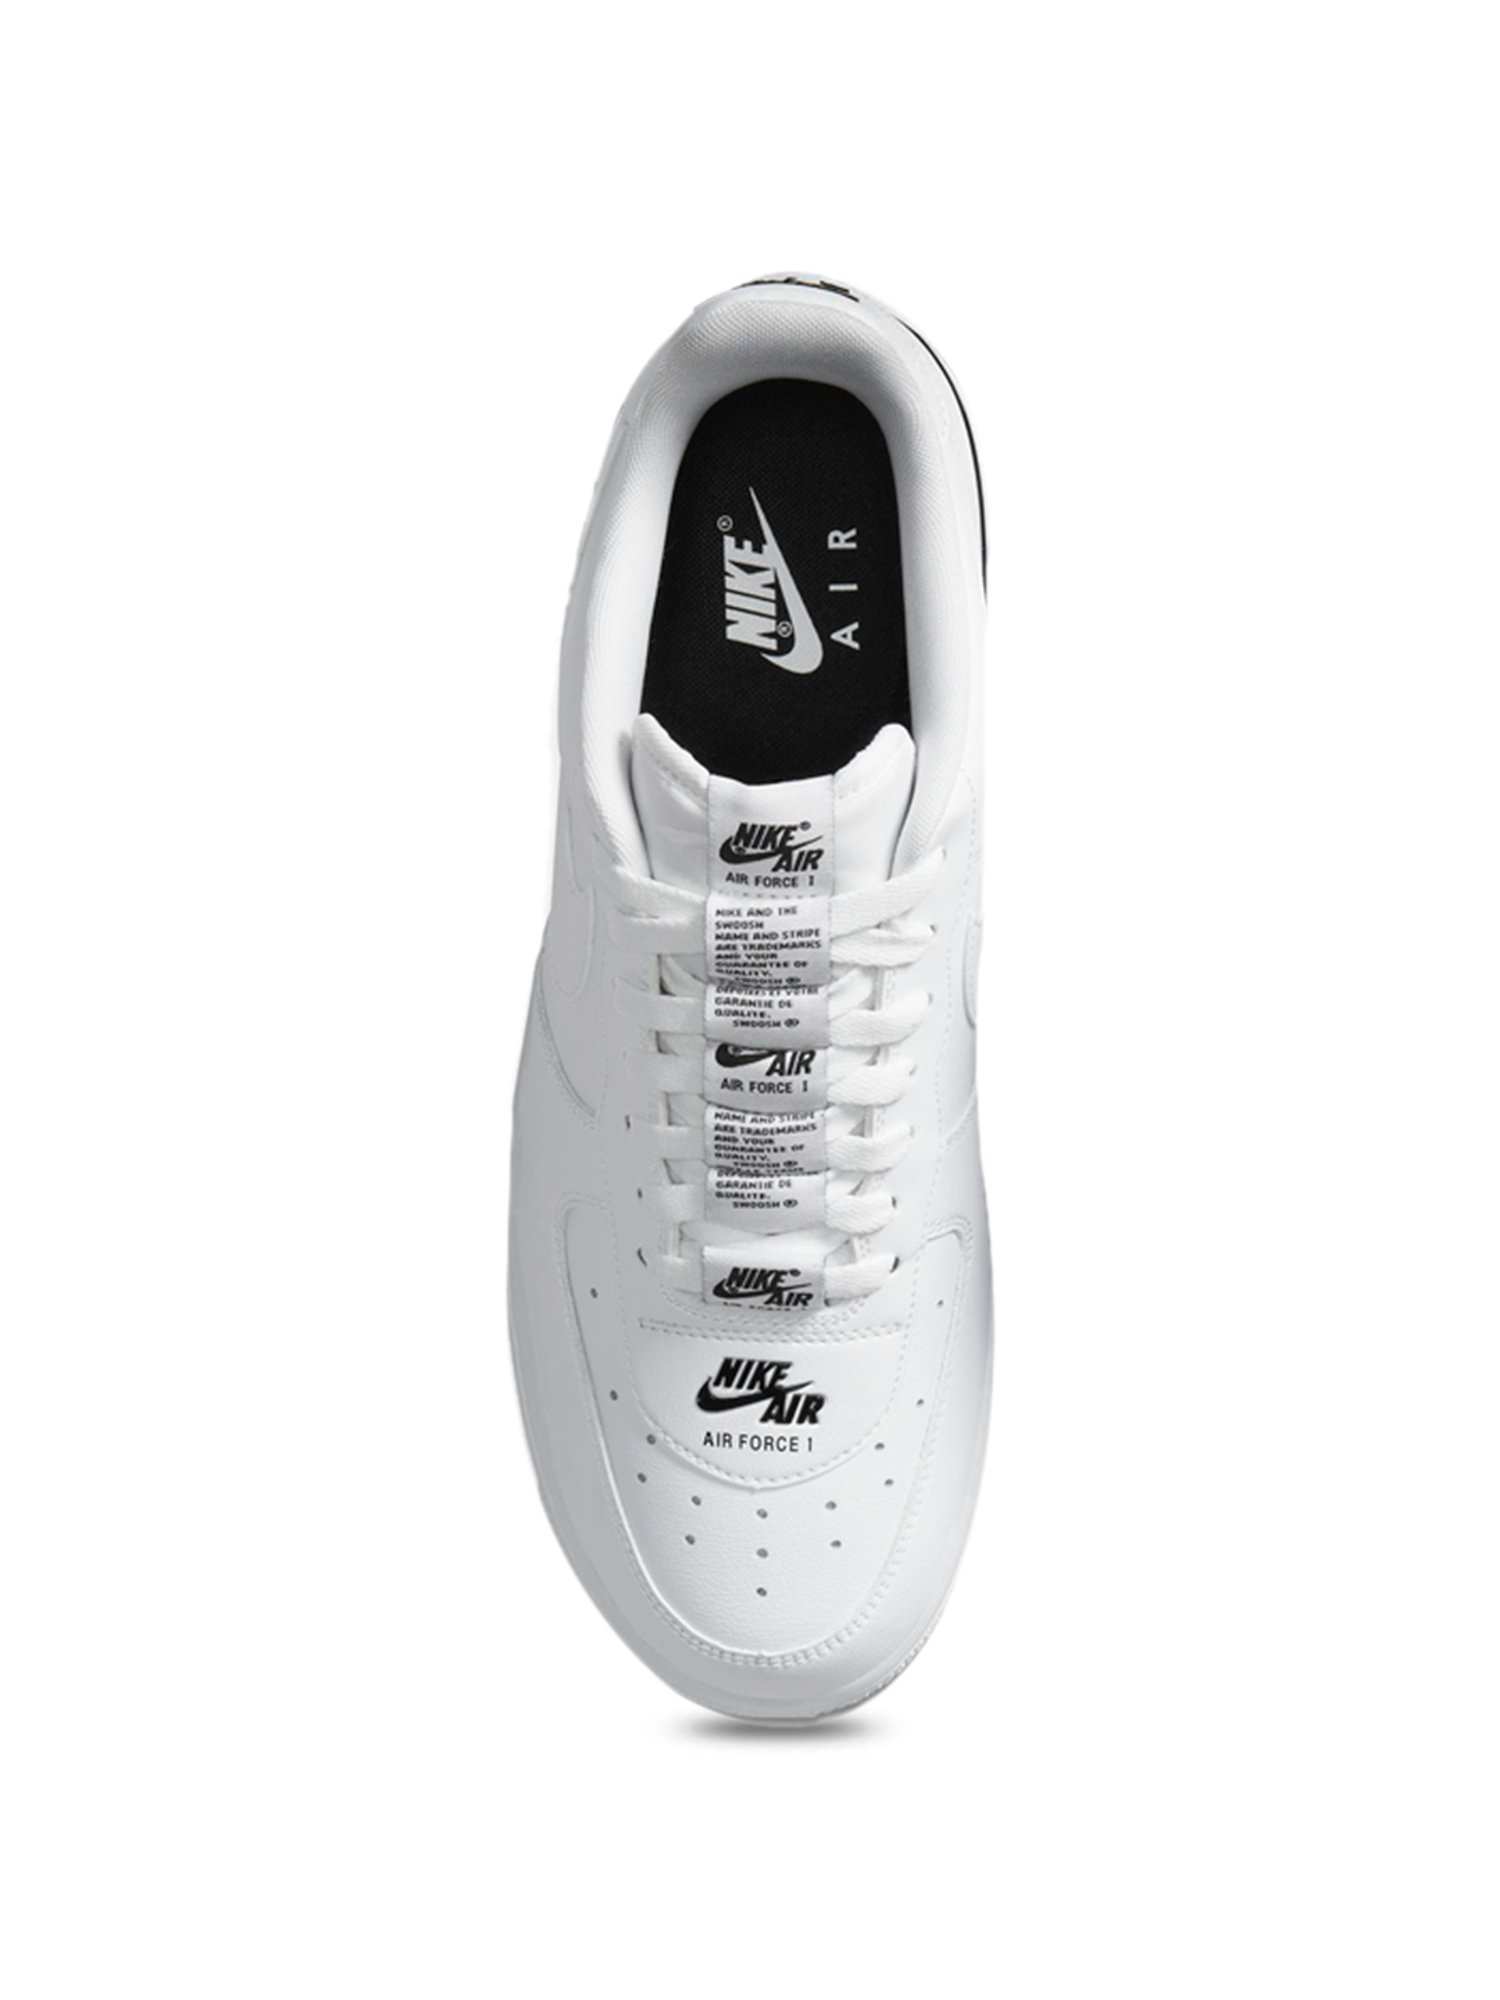 classic nike shoes 198s